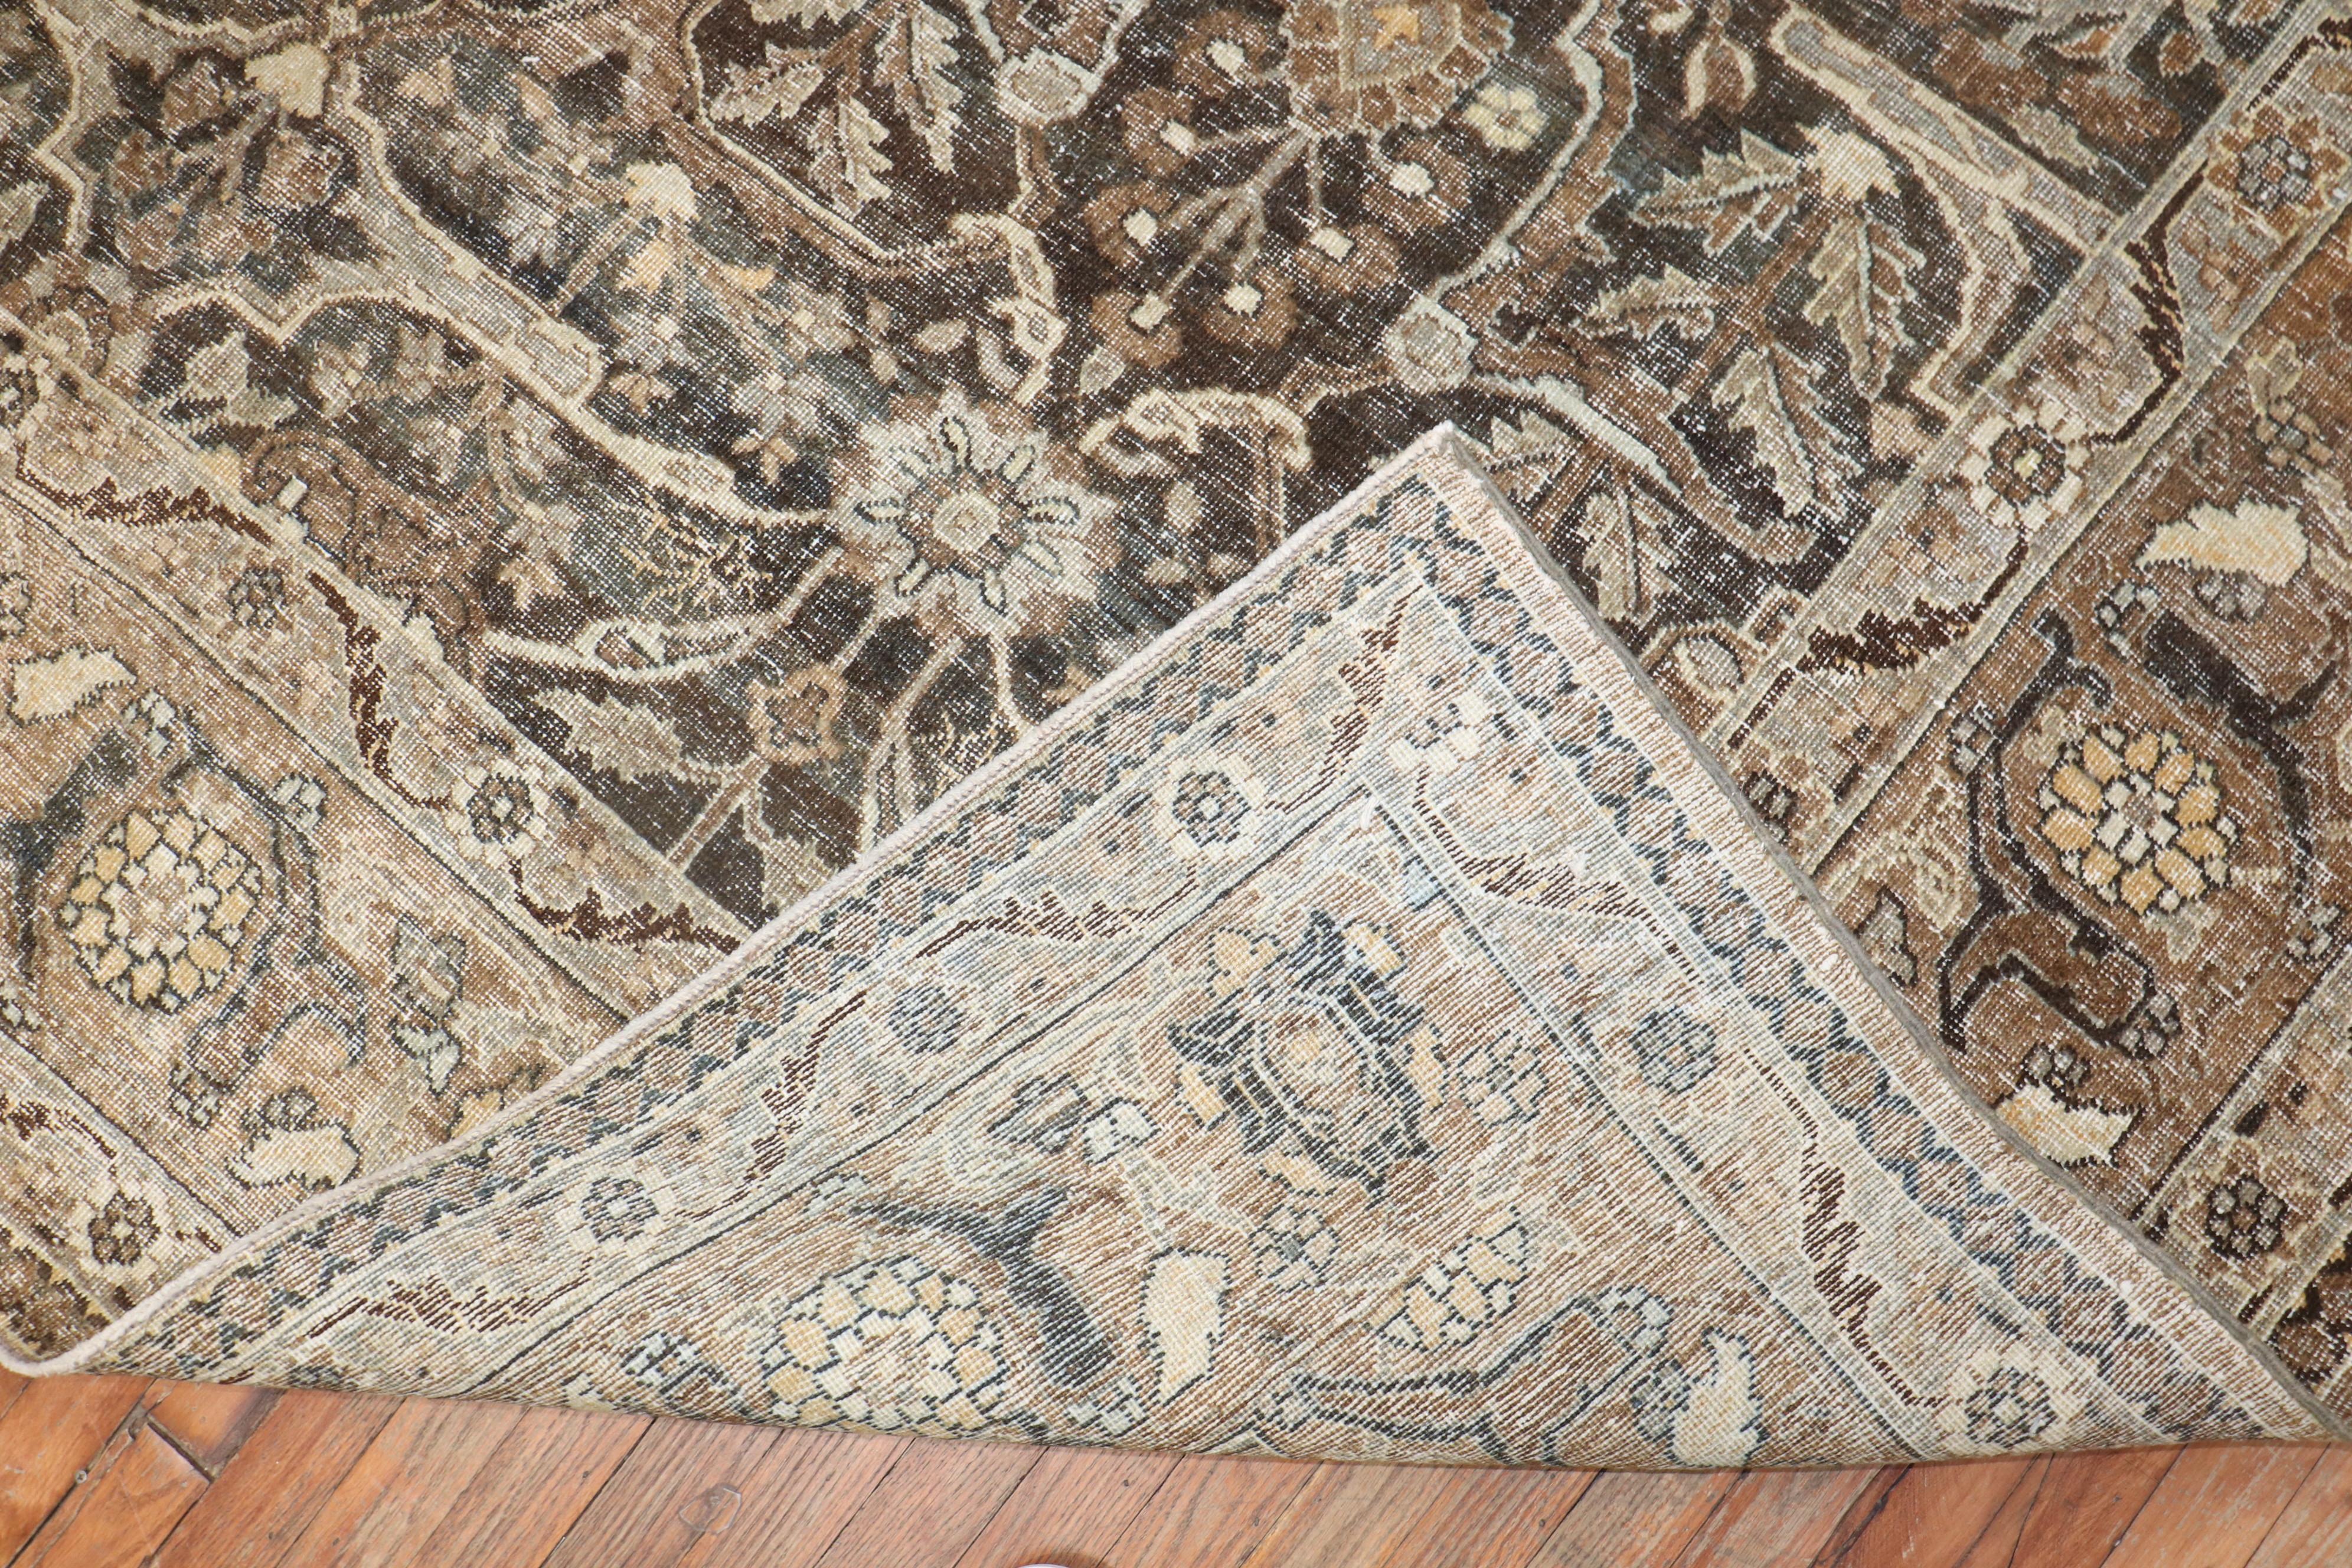 An antique Persian Tabriz Rug in brown and charcoal from the 1st quarter of the 20th century

Details
rug no.	j2721
size	9' x 12' 1